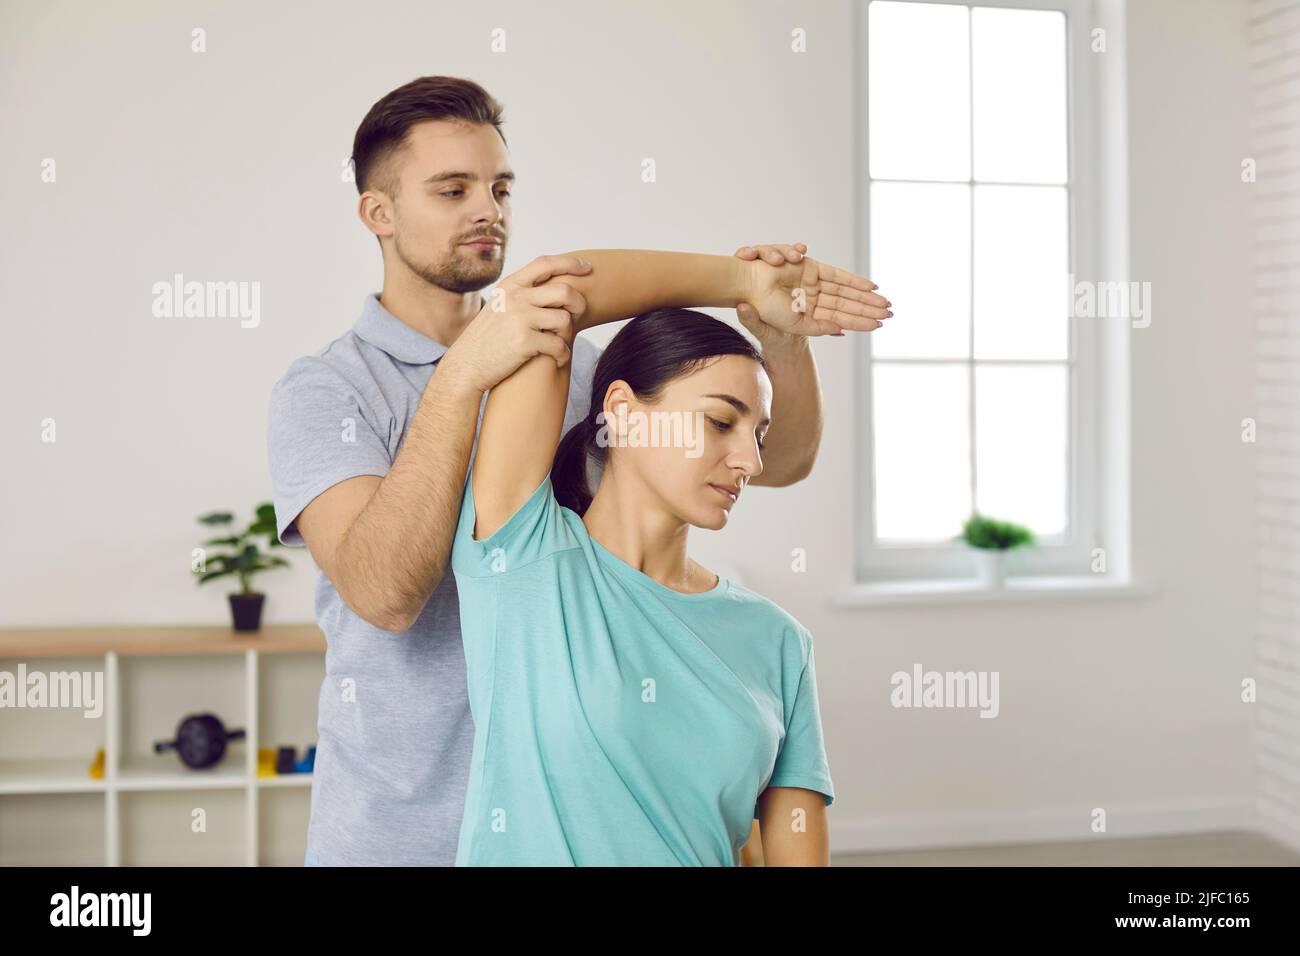 Male physiotherapist help patient with arm recovery Stock Photo